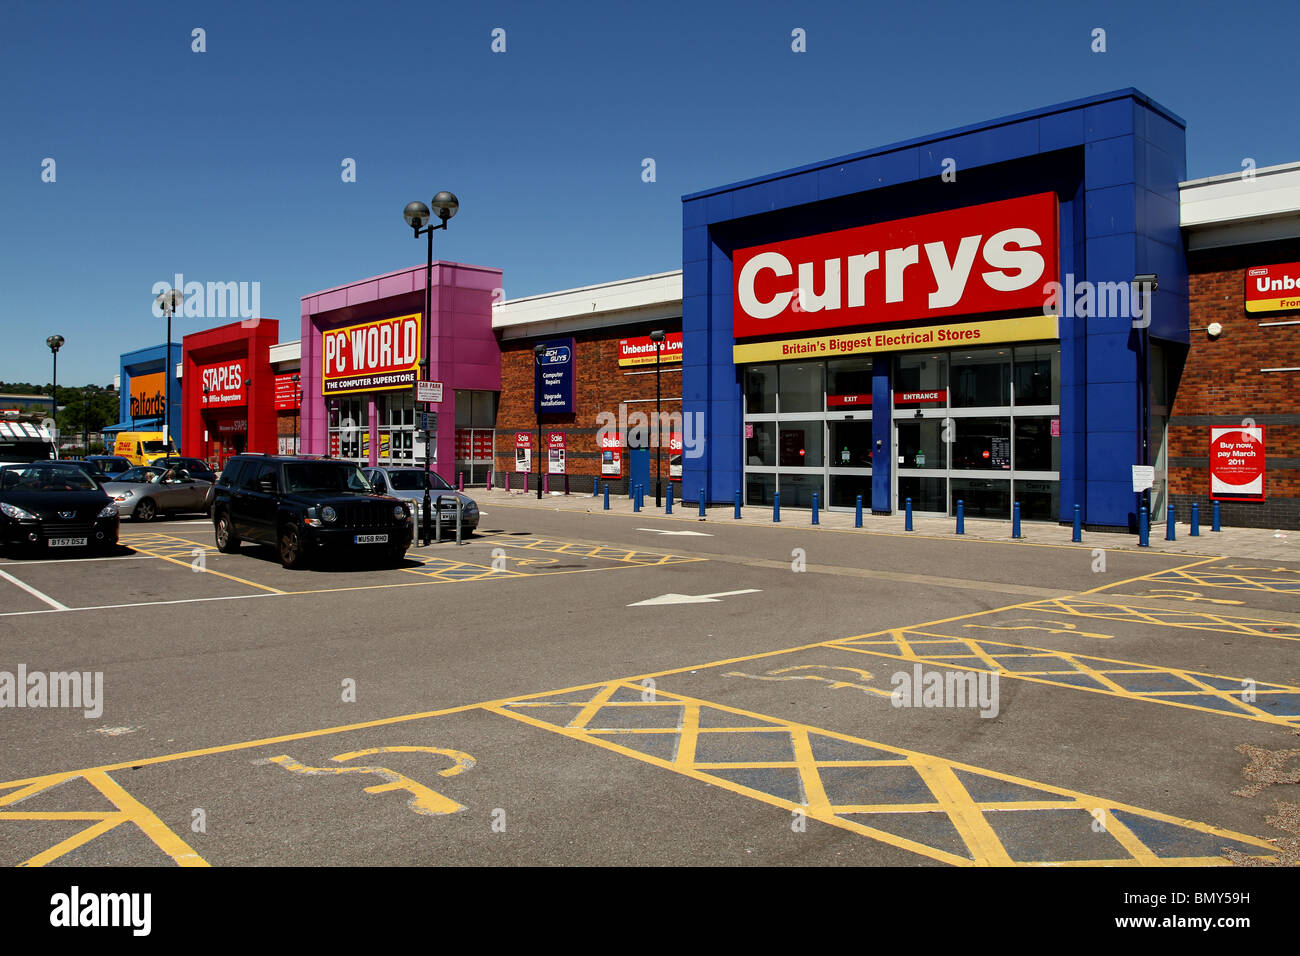 Curry's electrical super store branch in Bristol Stock Photo - Alamy